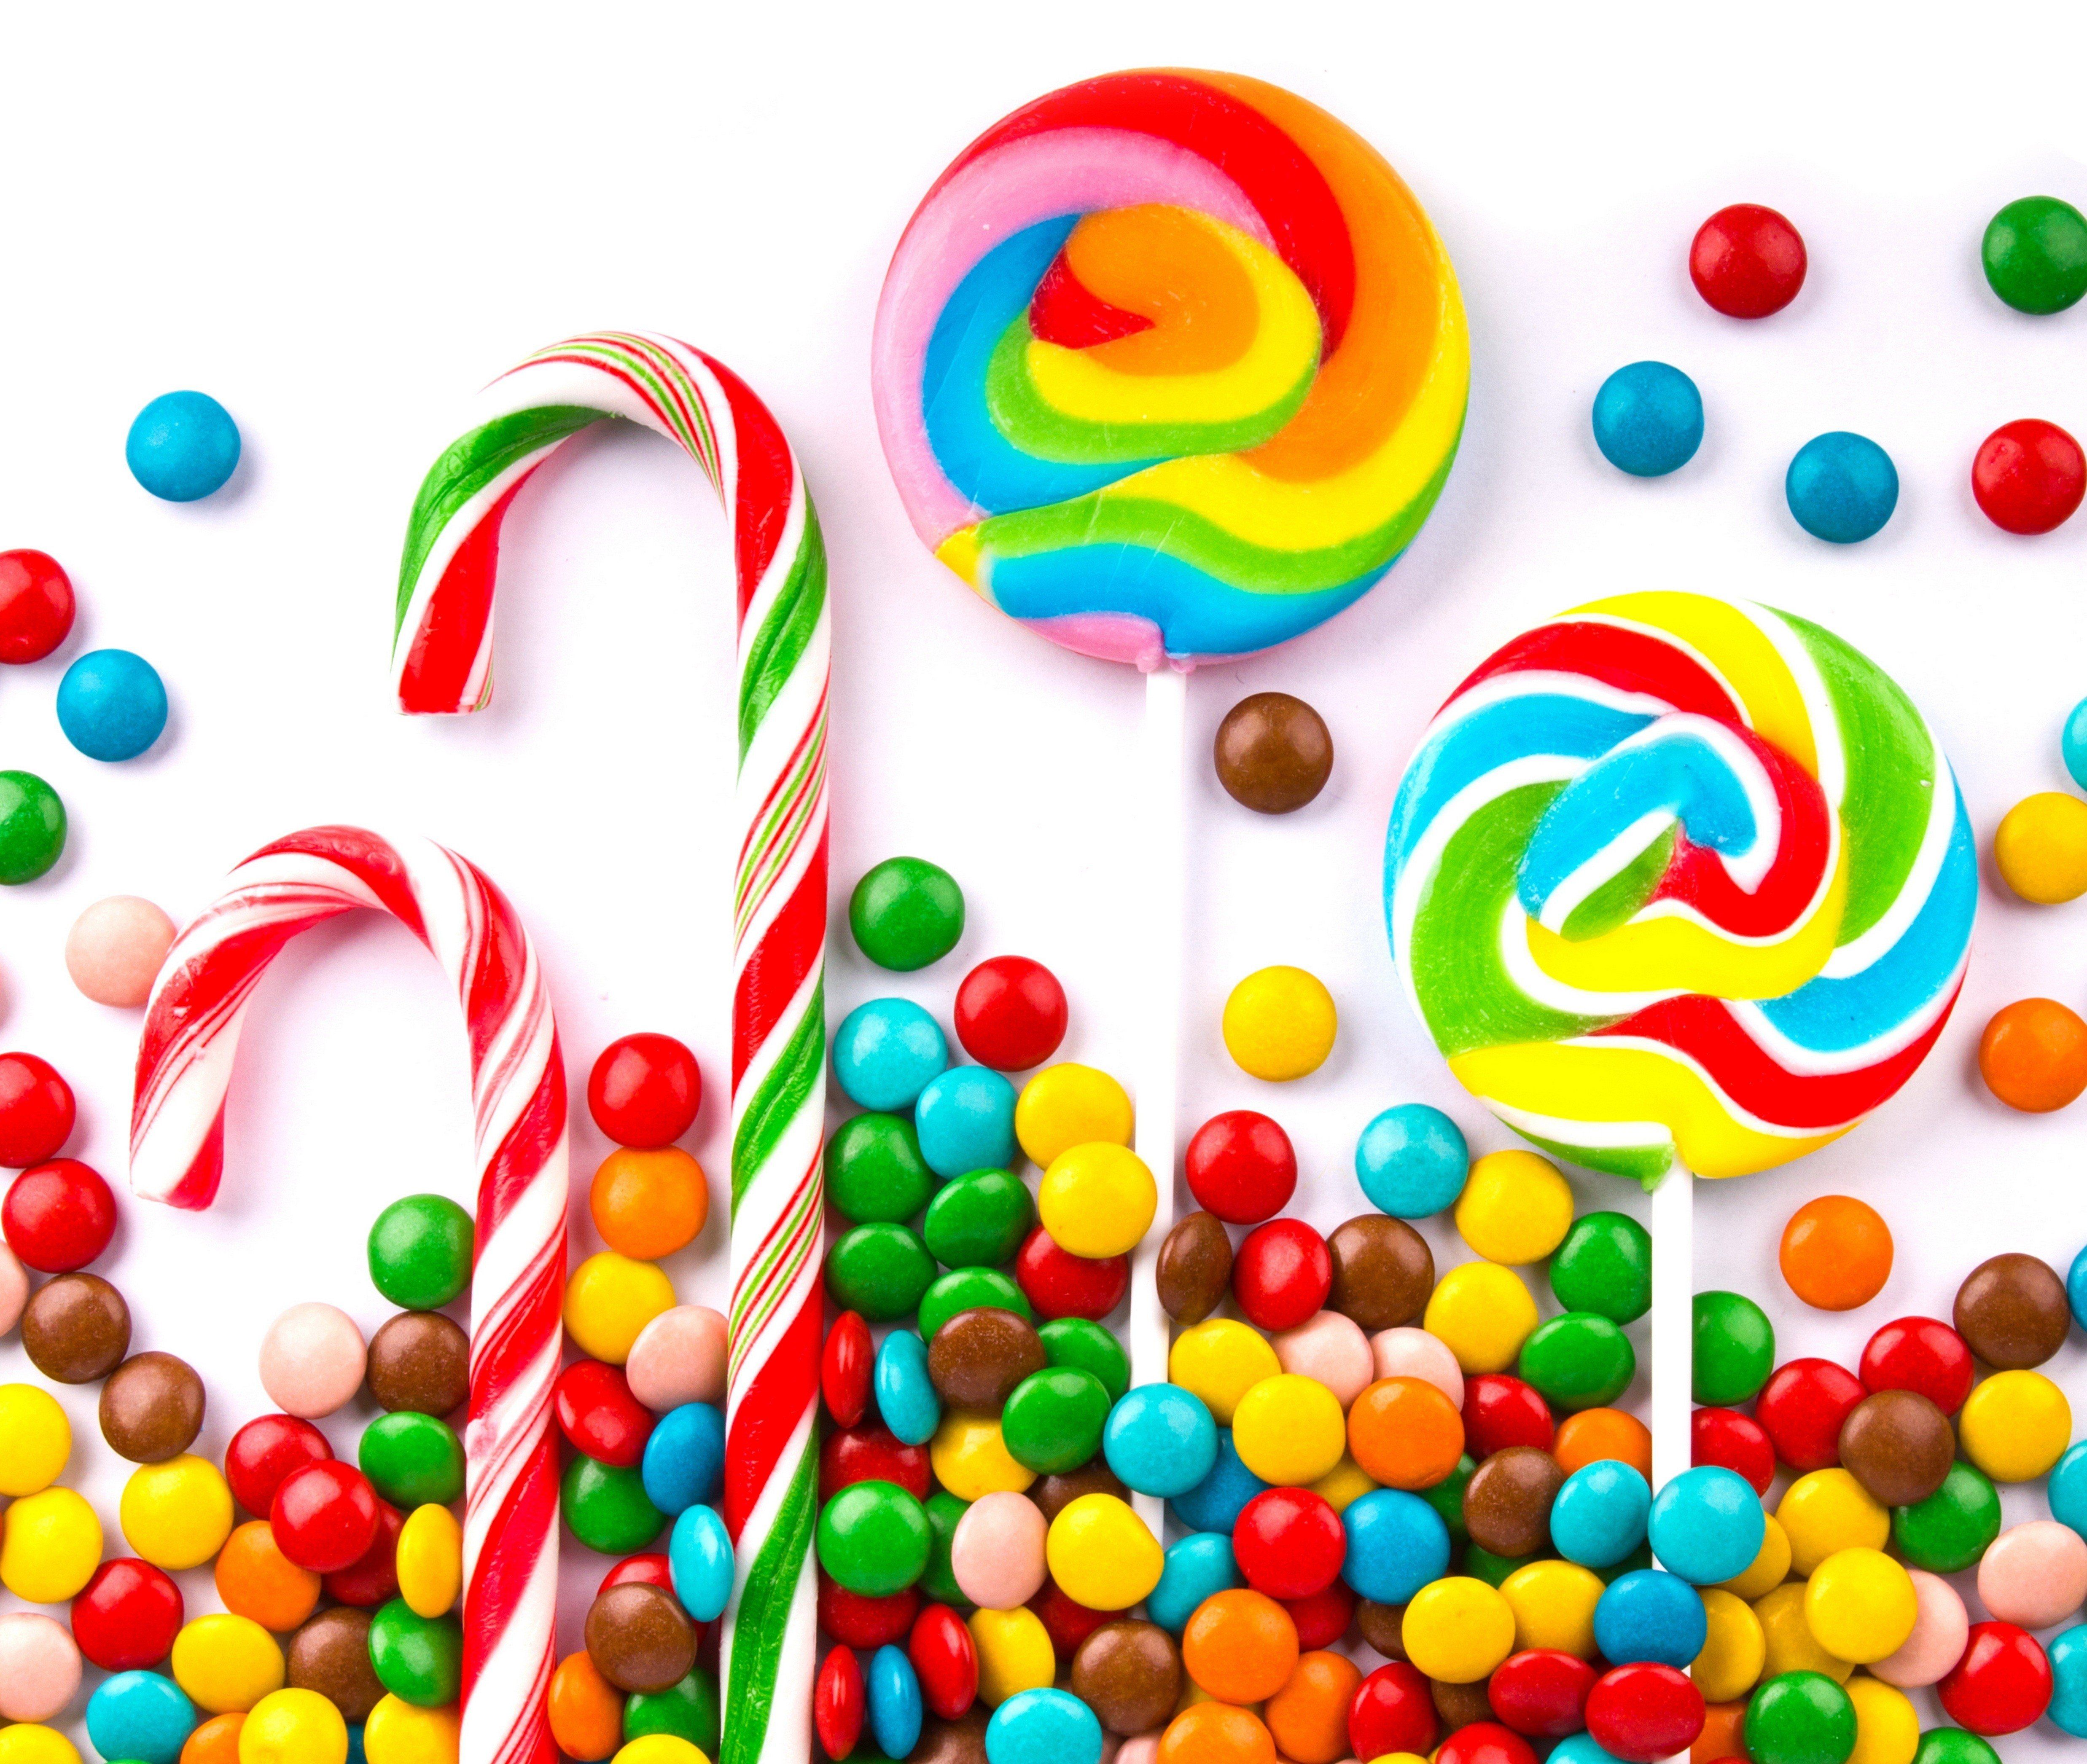 Candy and Sweets Wallpaper Free Candy and Sweets Background